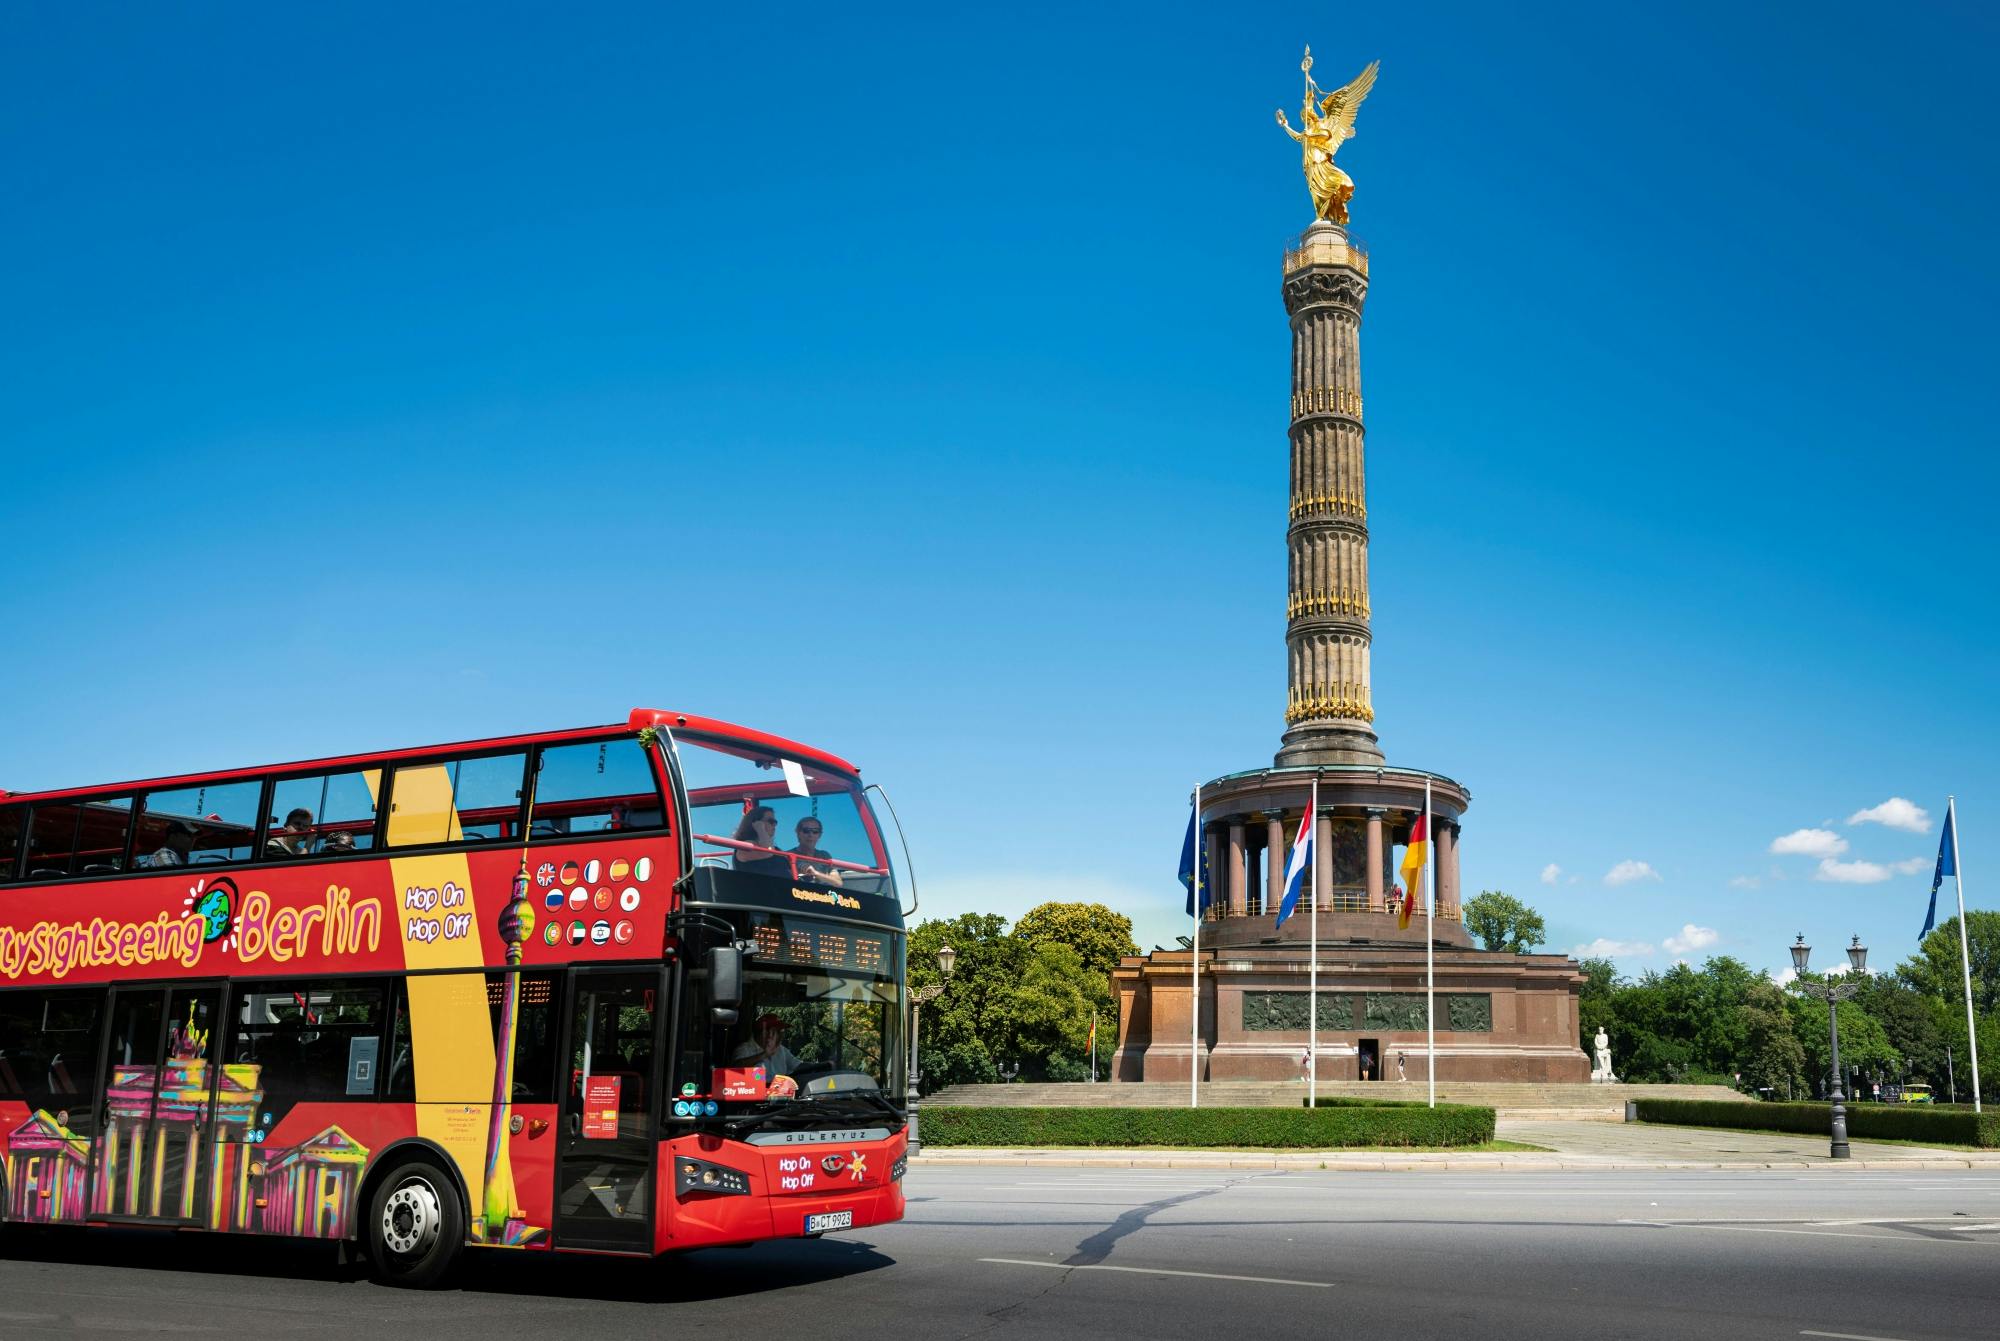 City Sightseeing Hop-On-Hop-Off-Bustour durch Berlin